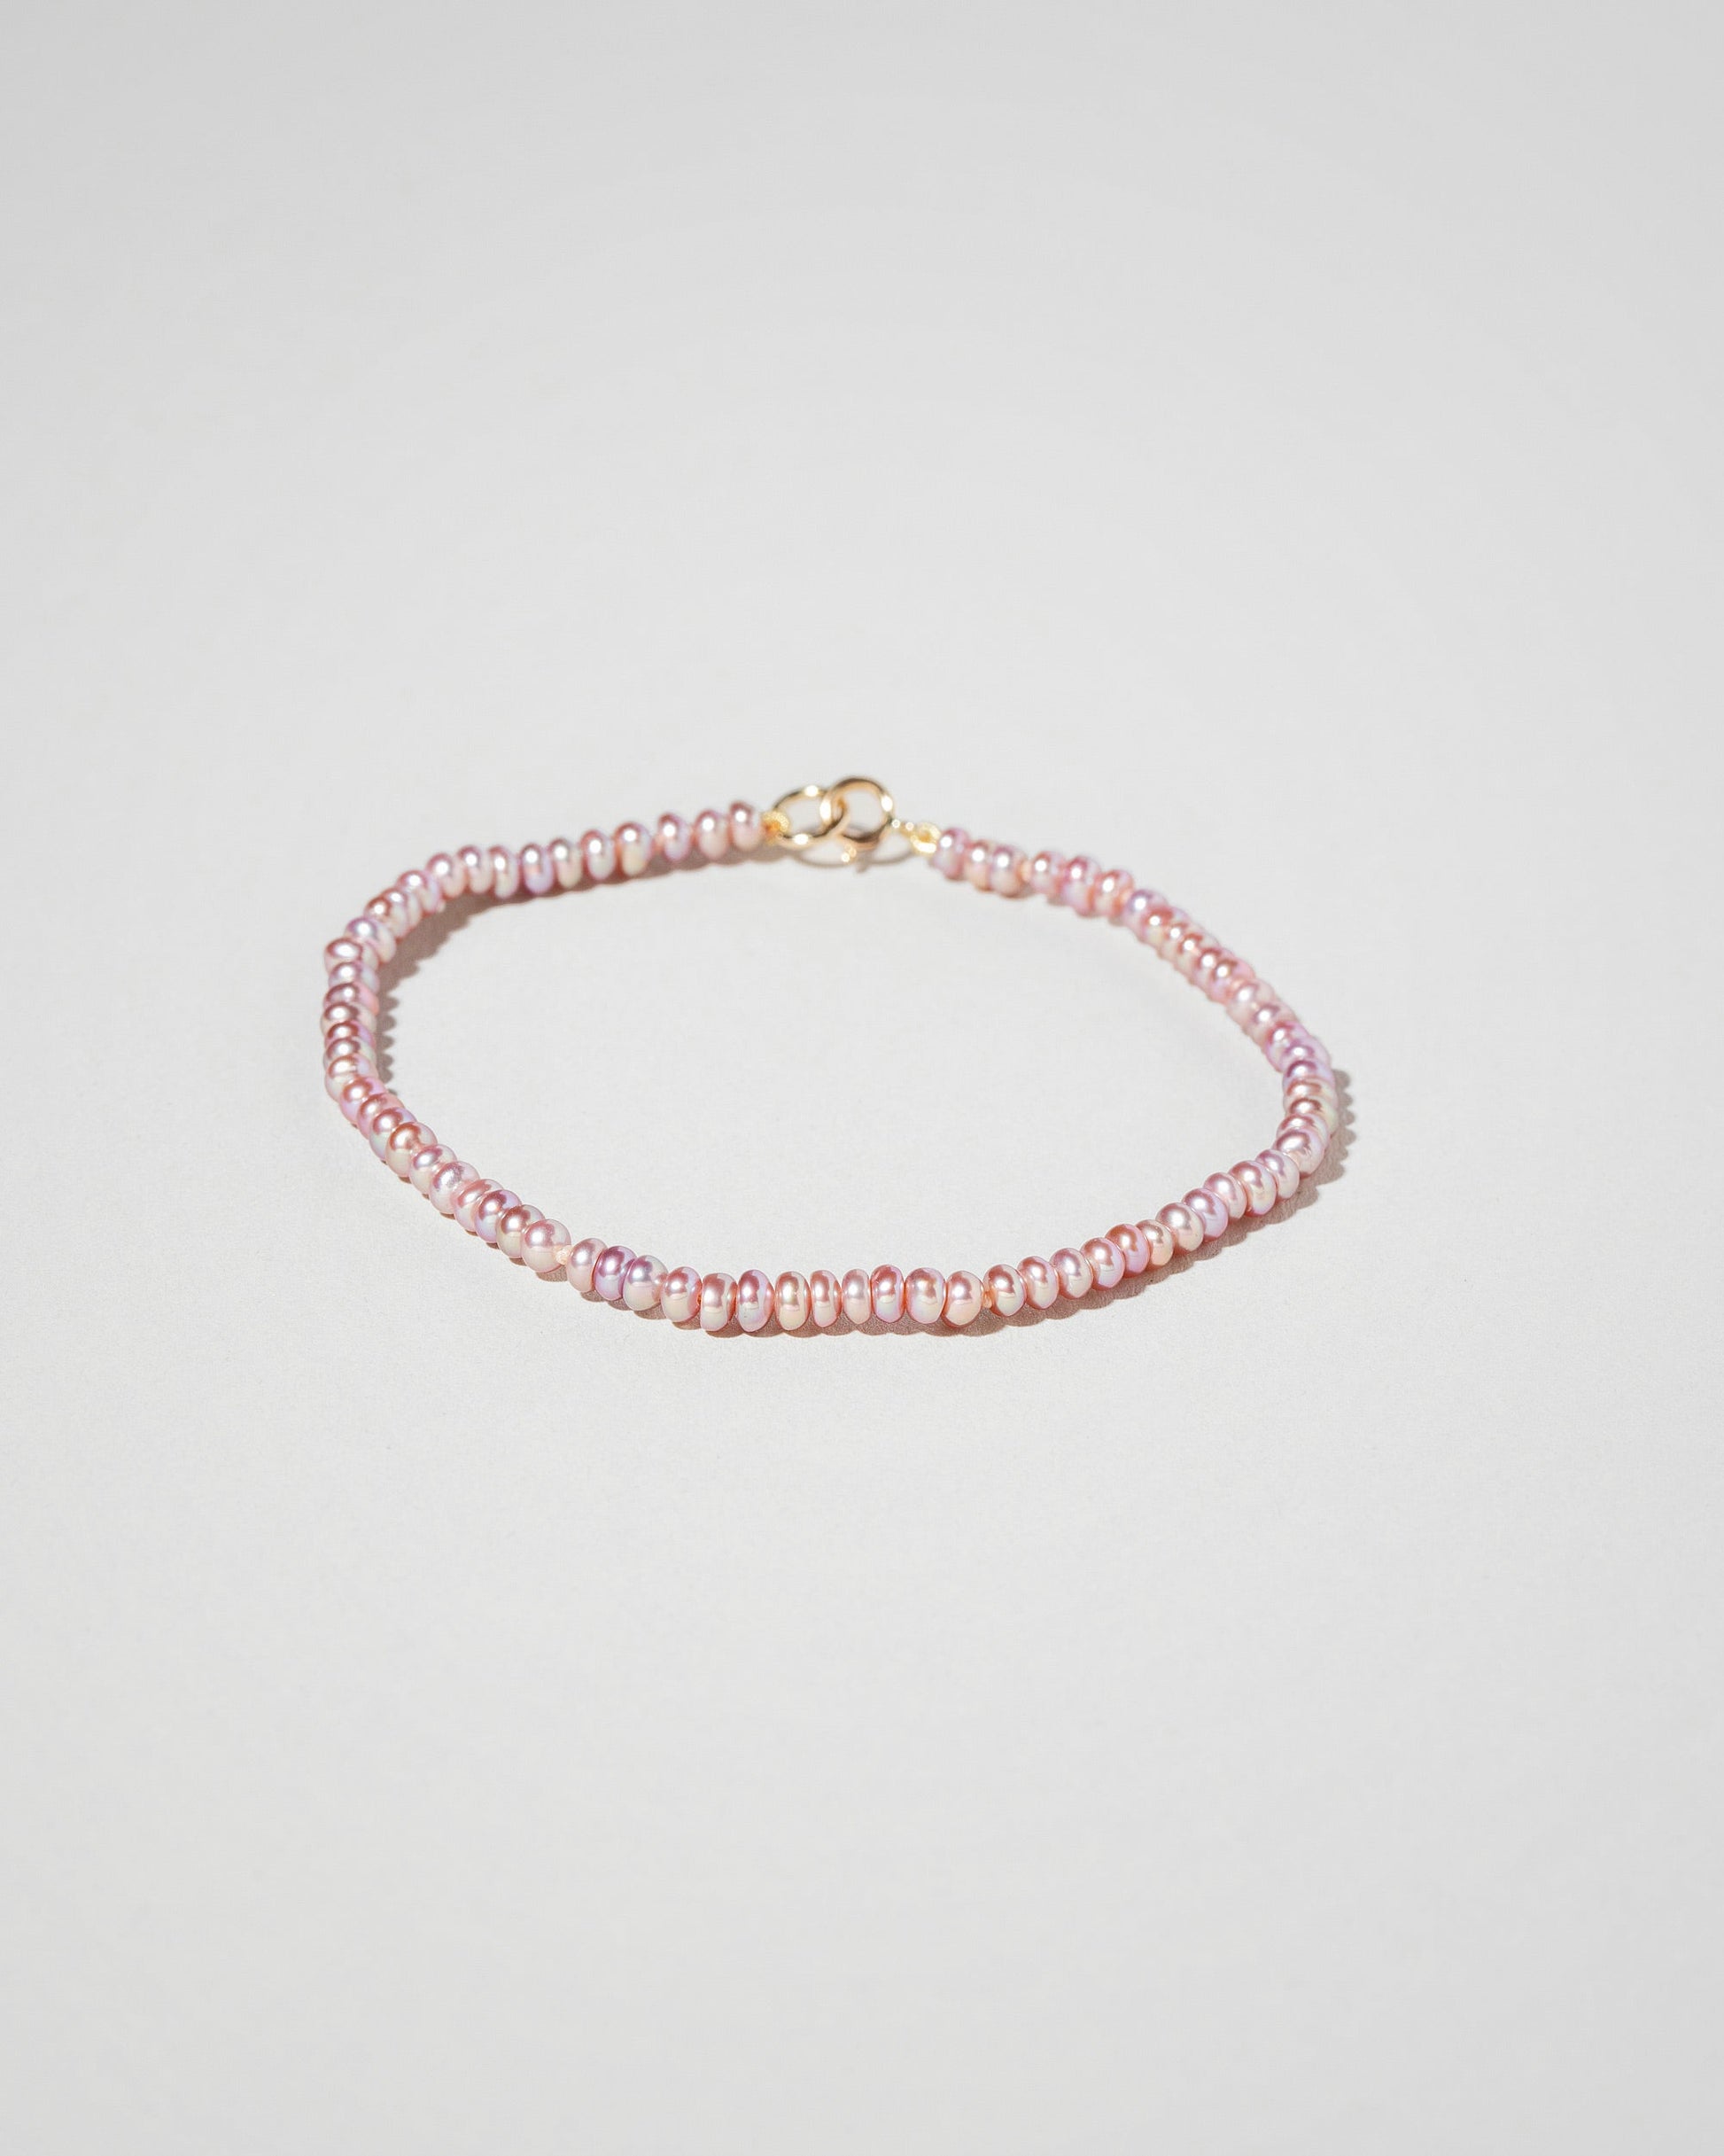 Lucky Red Thread Bracelet/Anklet (Kid size avsilable) – Pearlsson